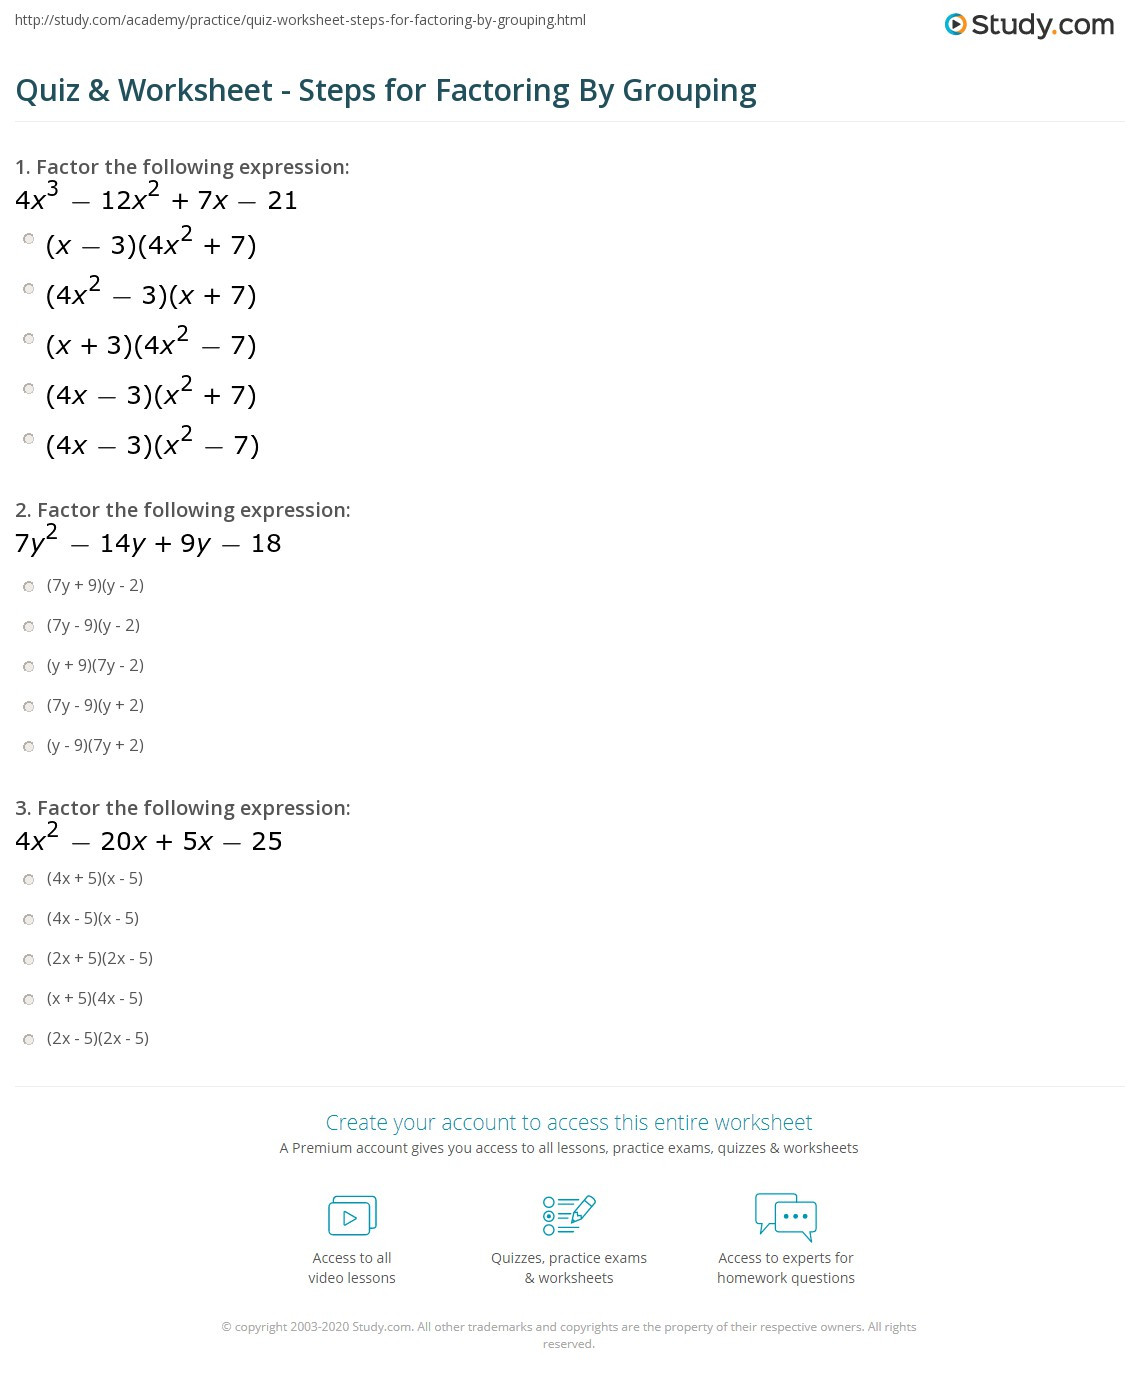 Factoring Linear Expressions Worksheet Quiz &amp; Worksheet Steps for Factoring by Grouping